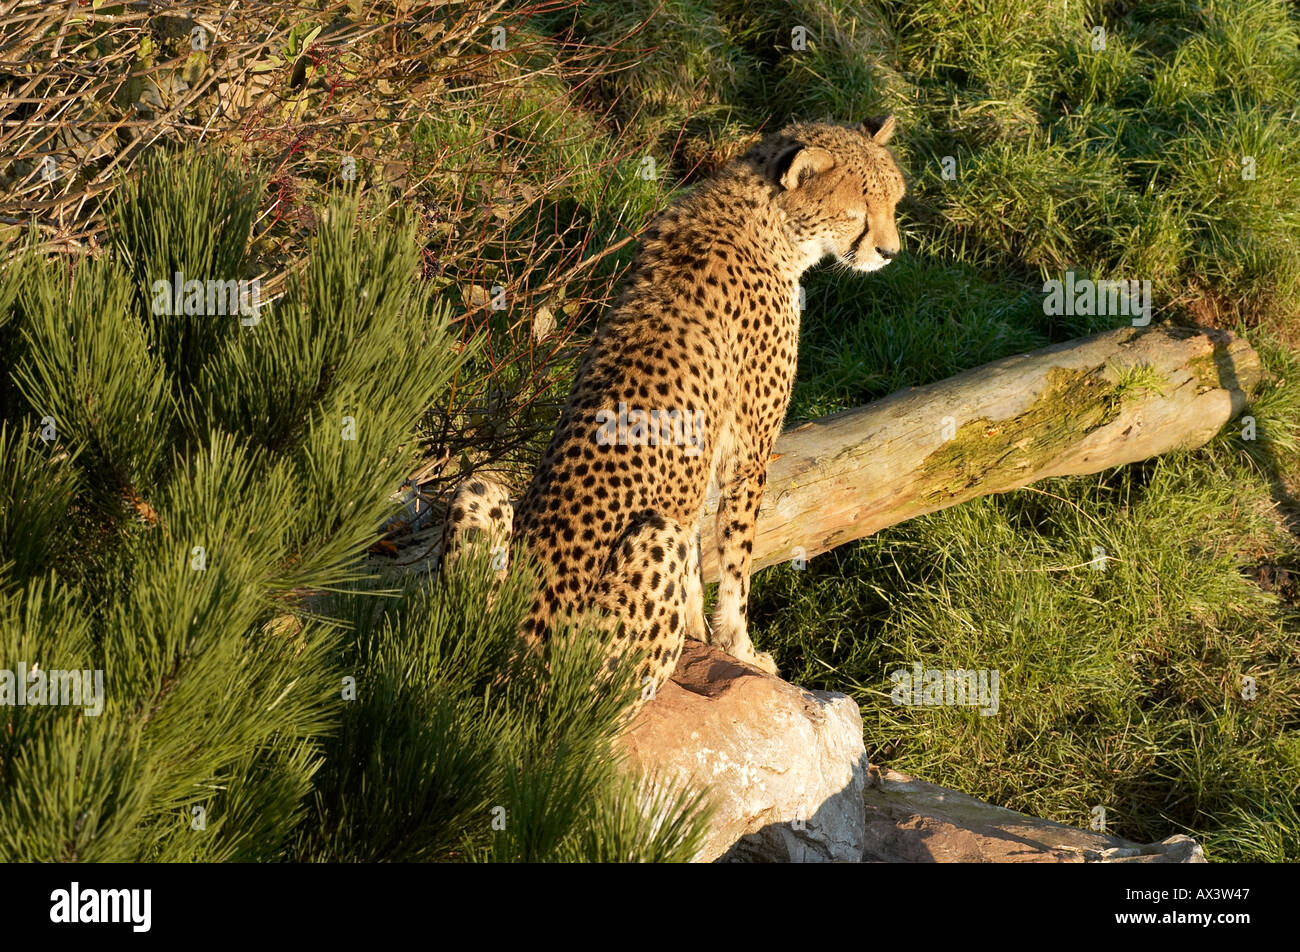 A big cat cheetah sitting and alert in the undergrowth The fastest land mammal on earth Stock Photo